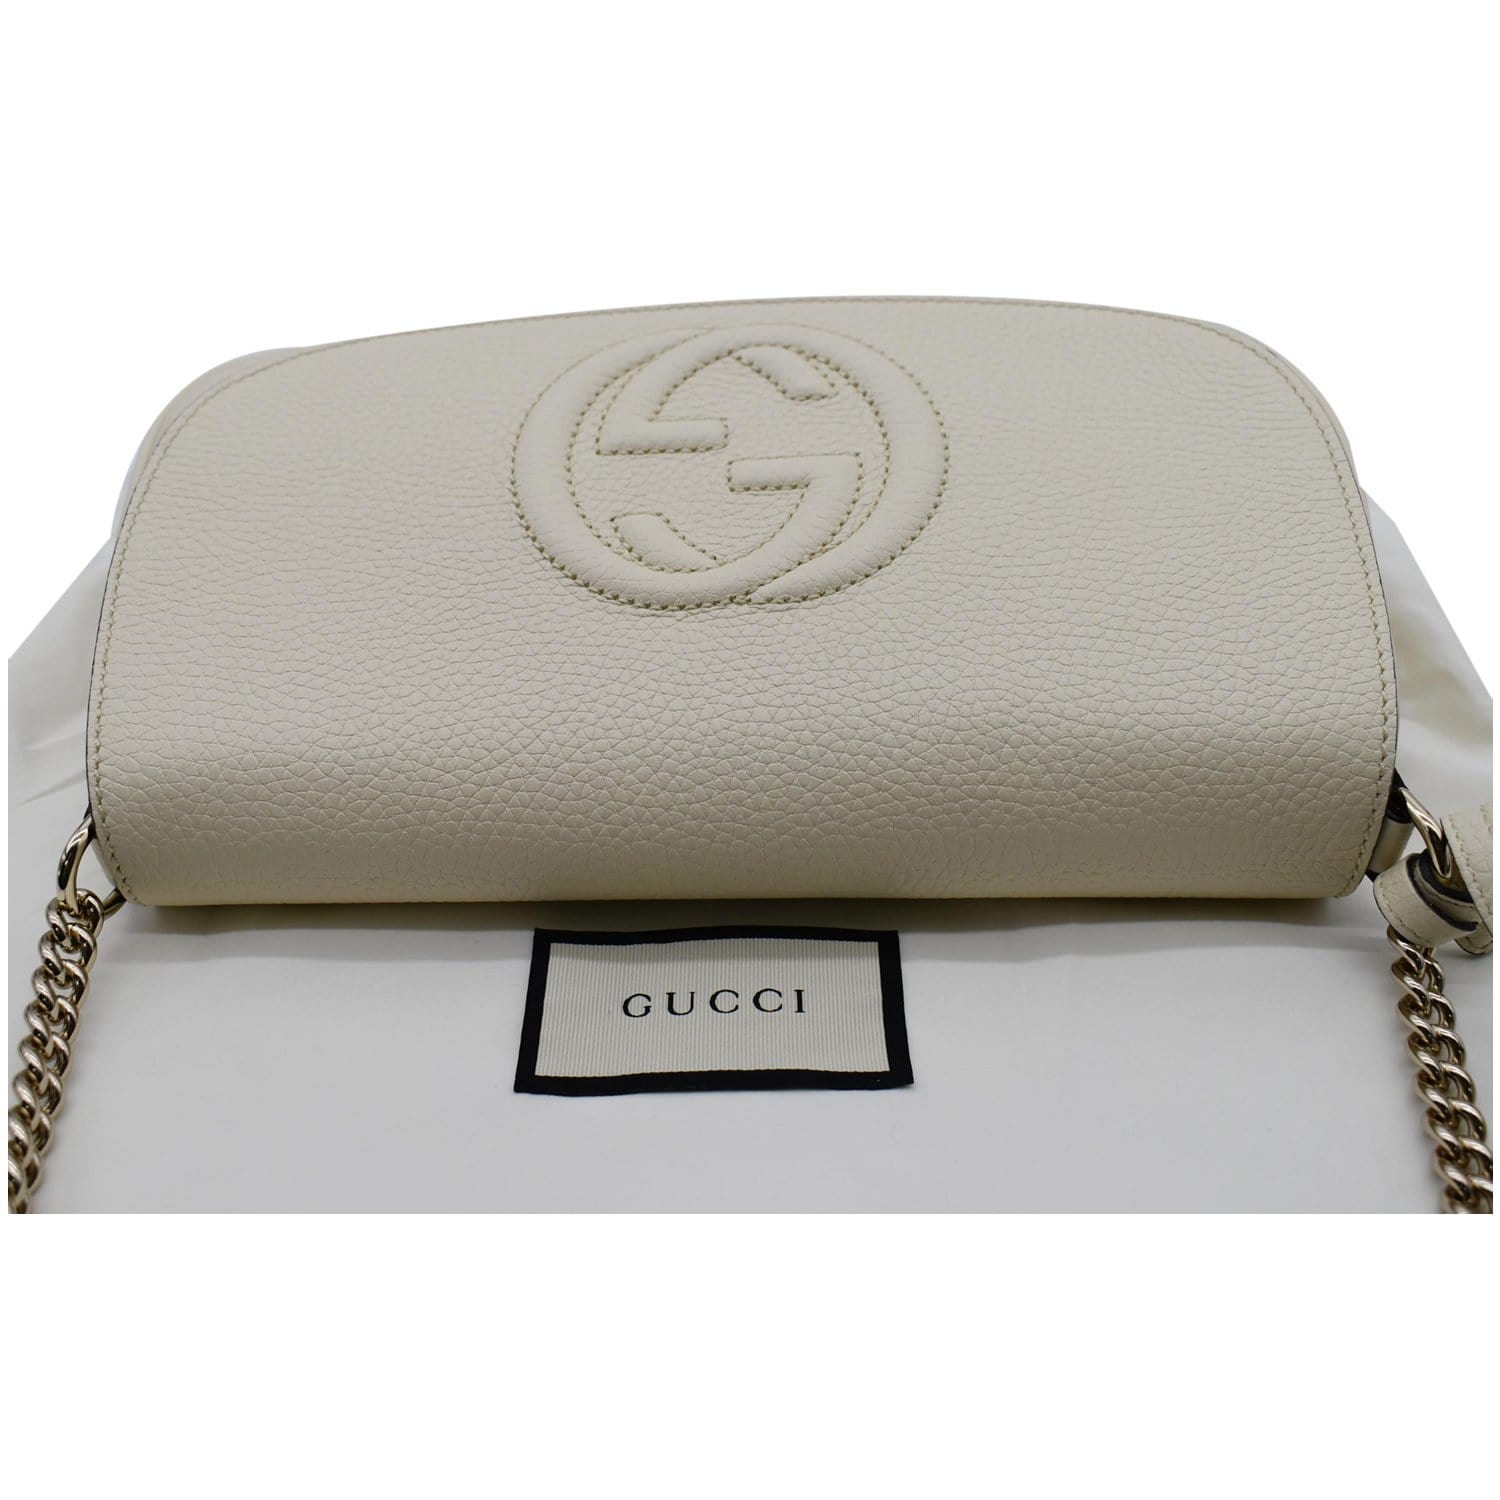 Gucci - Authenticated Soho Handbag - Leather White Plain for Women, Never Worn